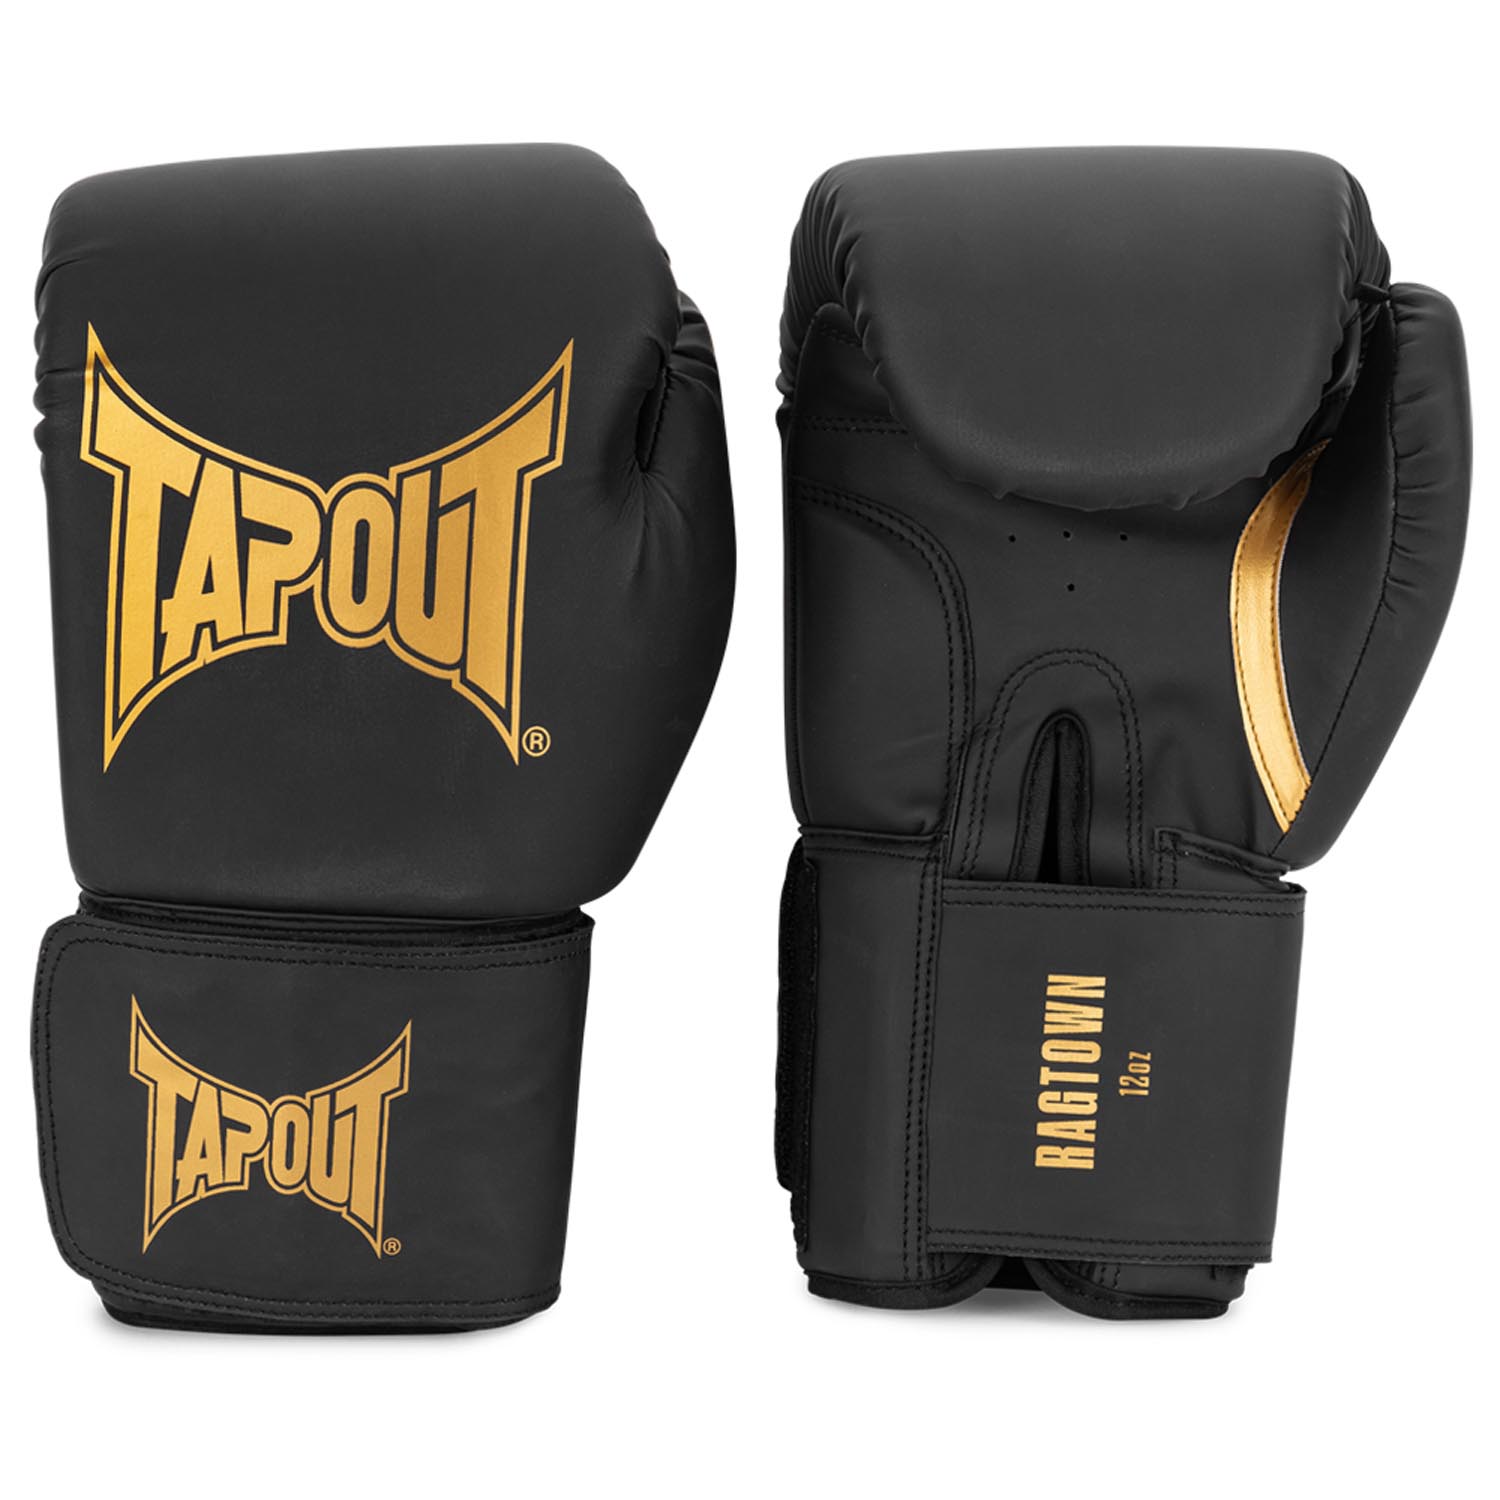 Tapout Boxing Gloves, Ragtown